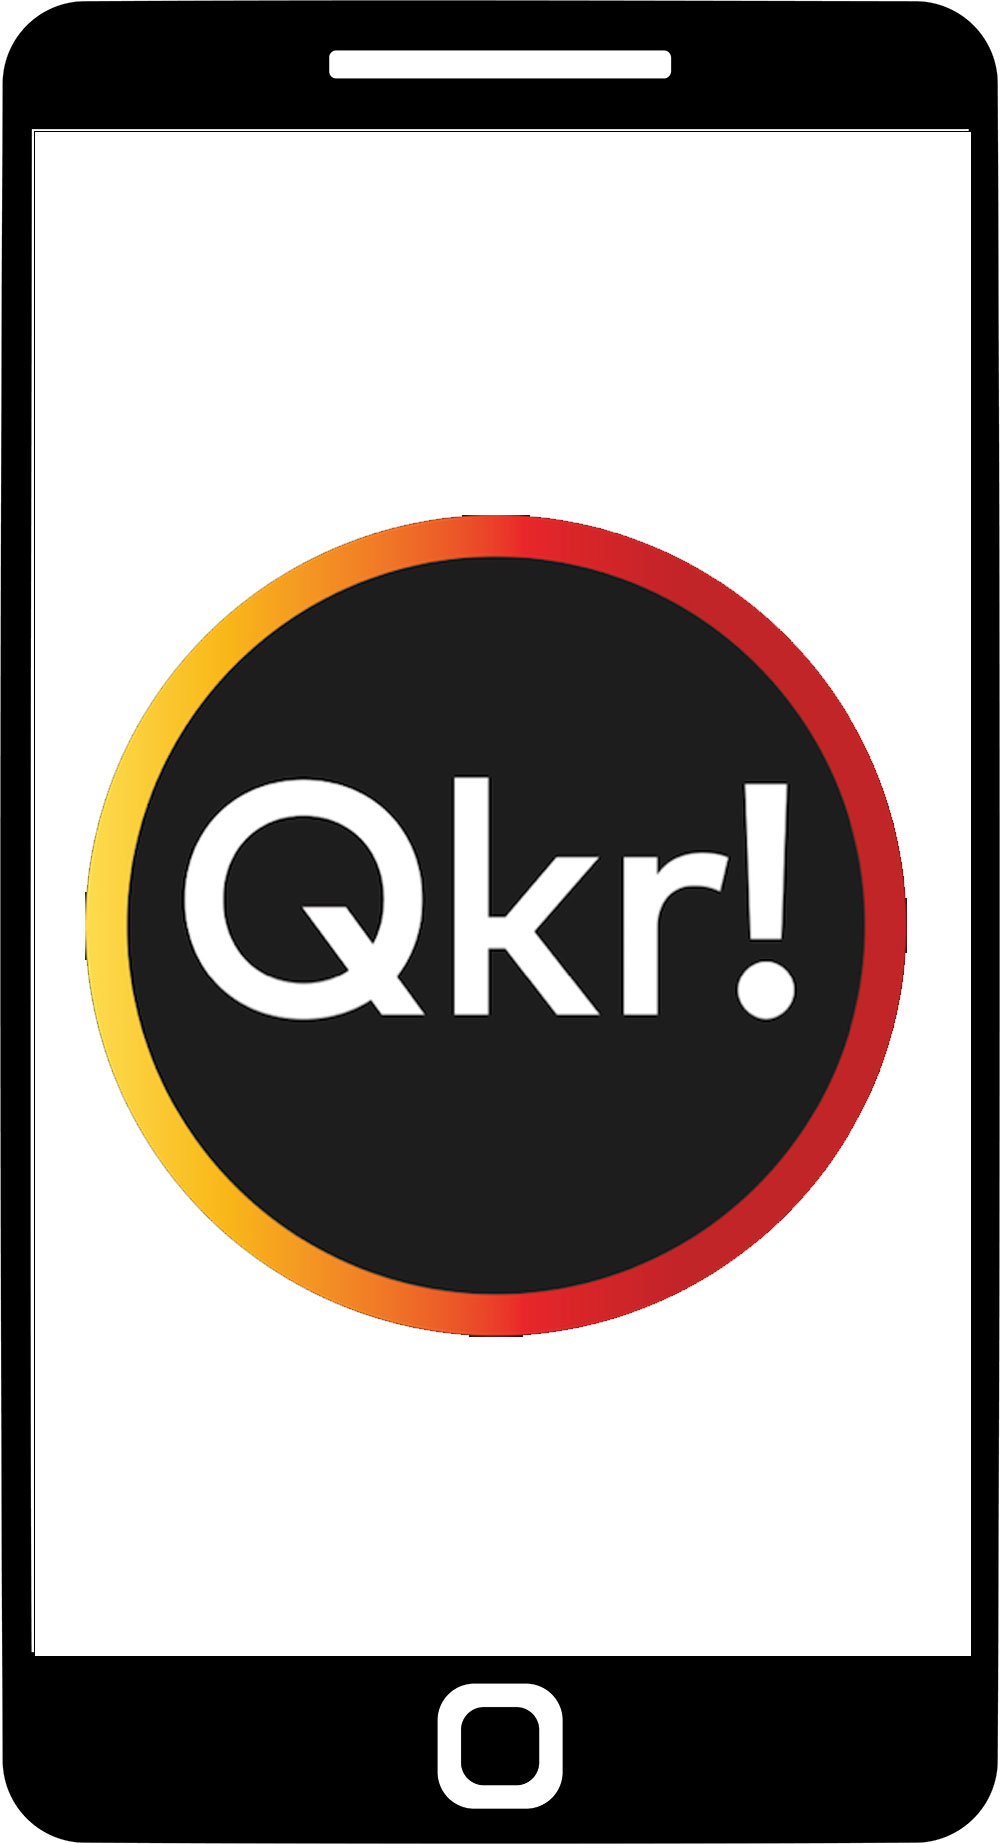 Qkr! logo on a mobile screen.